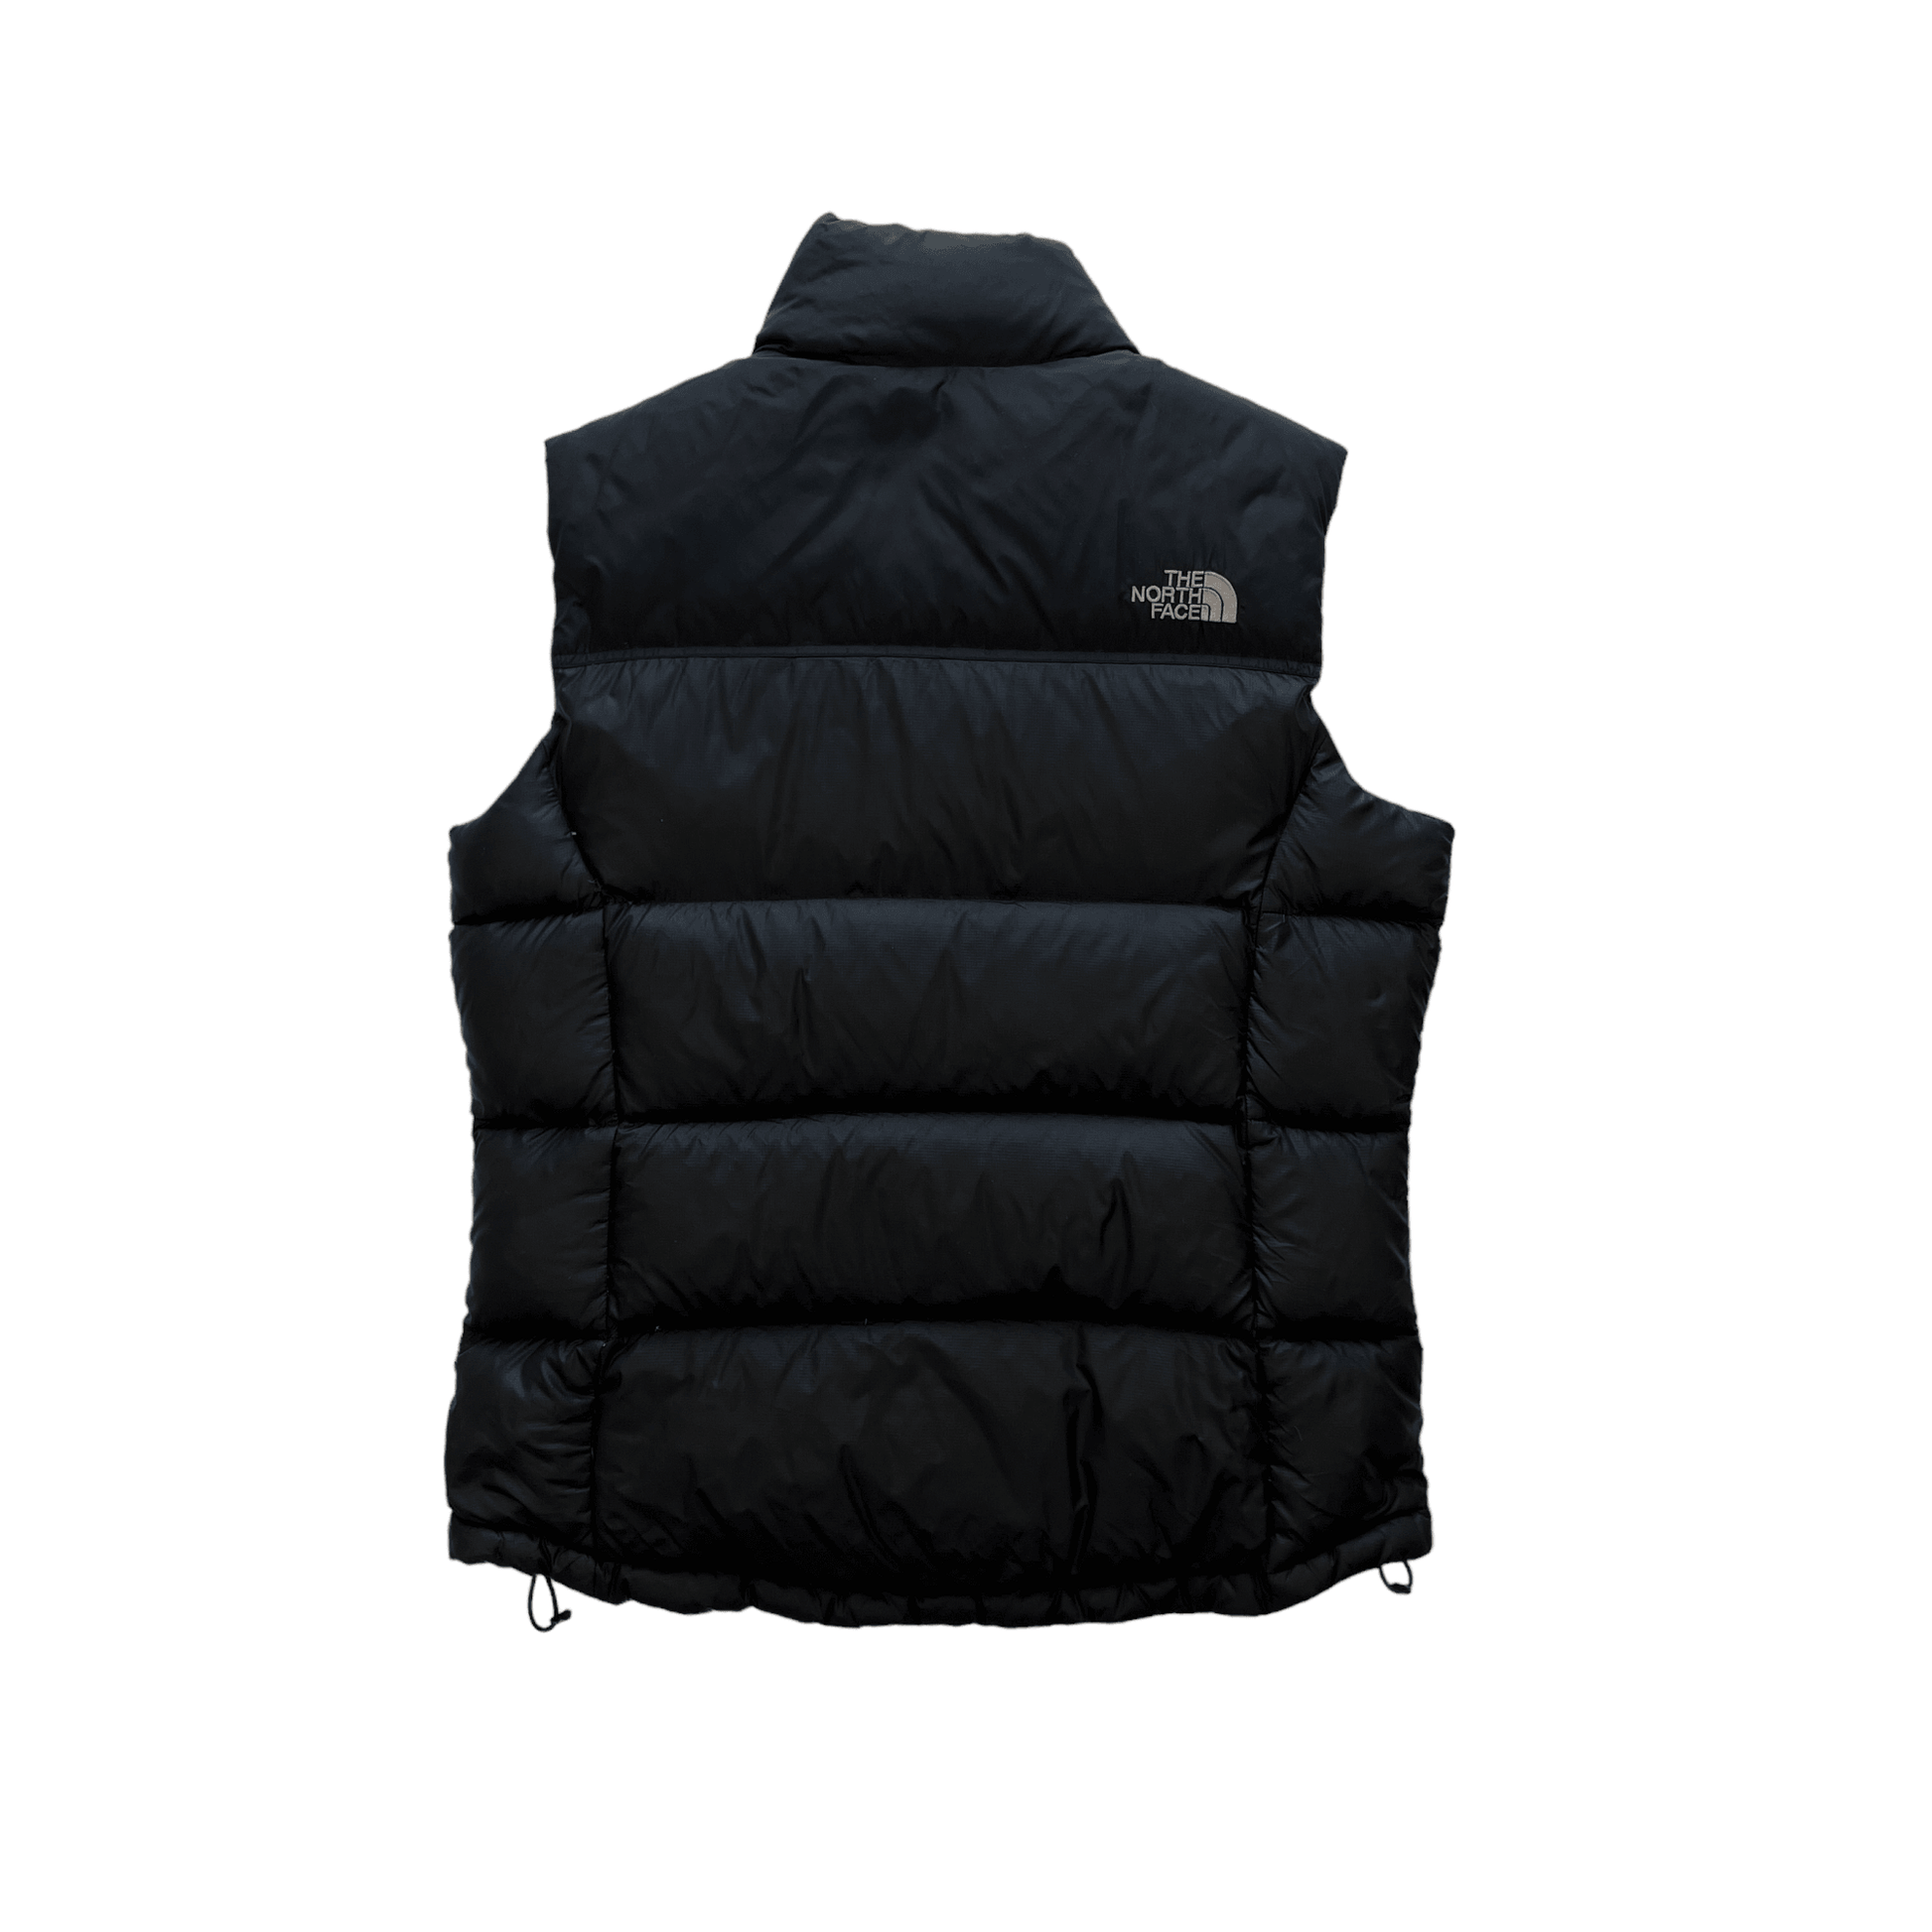 Vintage Black The North Face (TNF) Puffer Gilet - Small - The Streetwear Studio